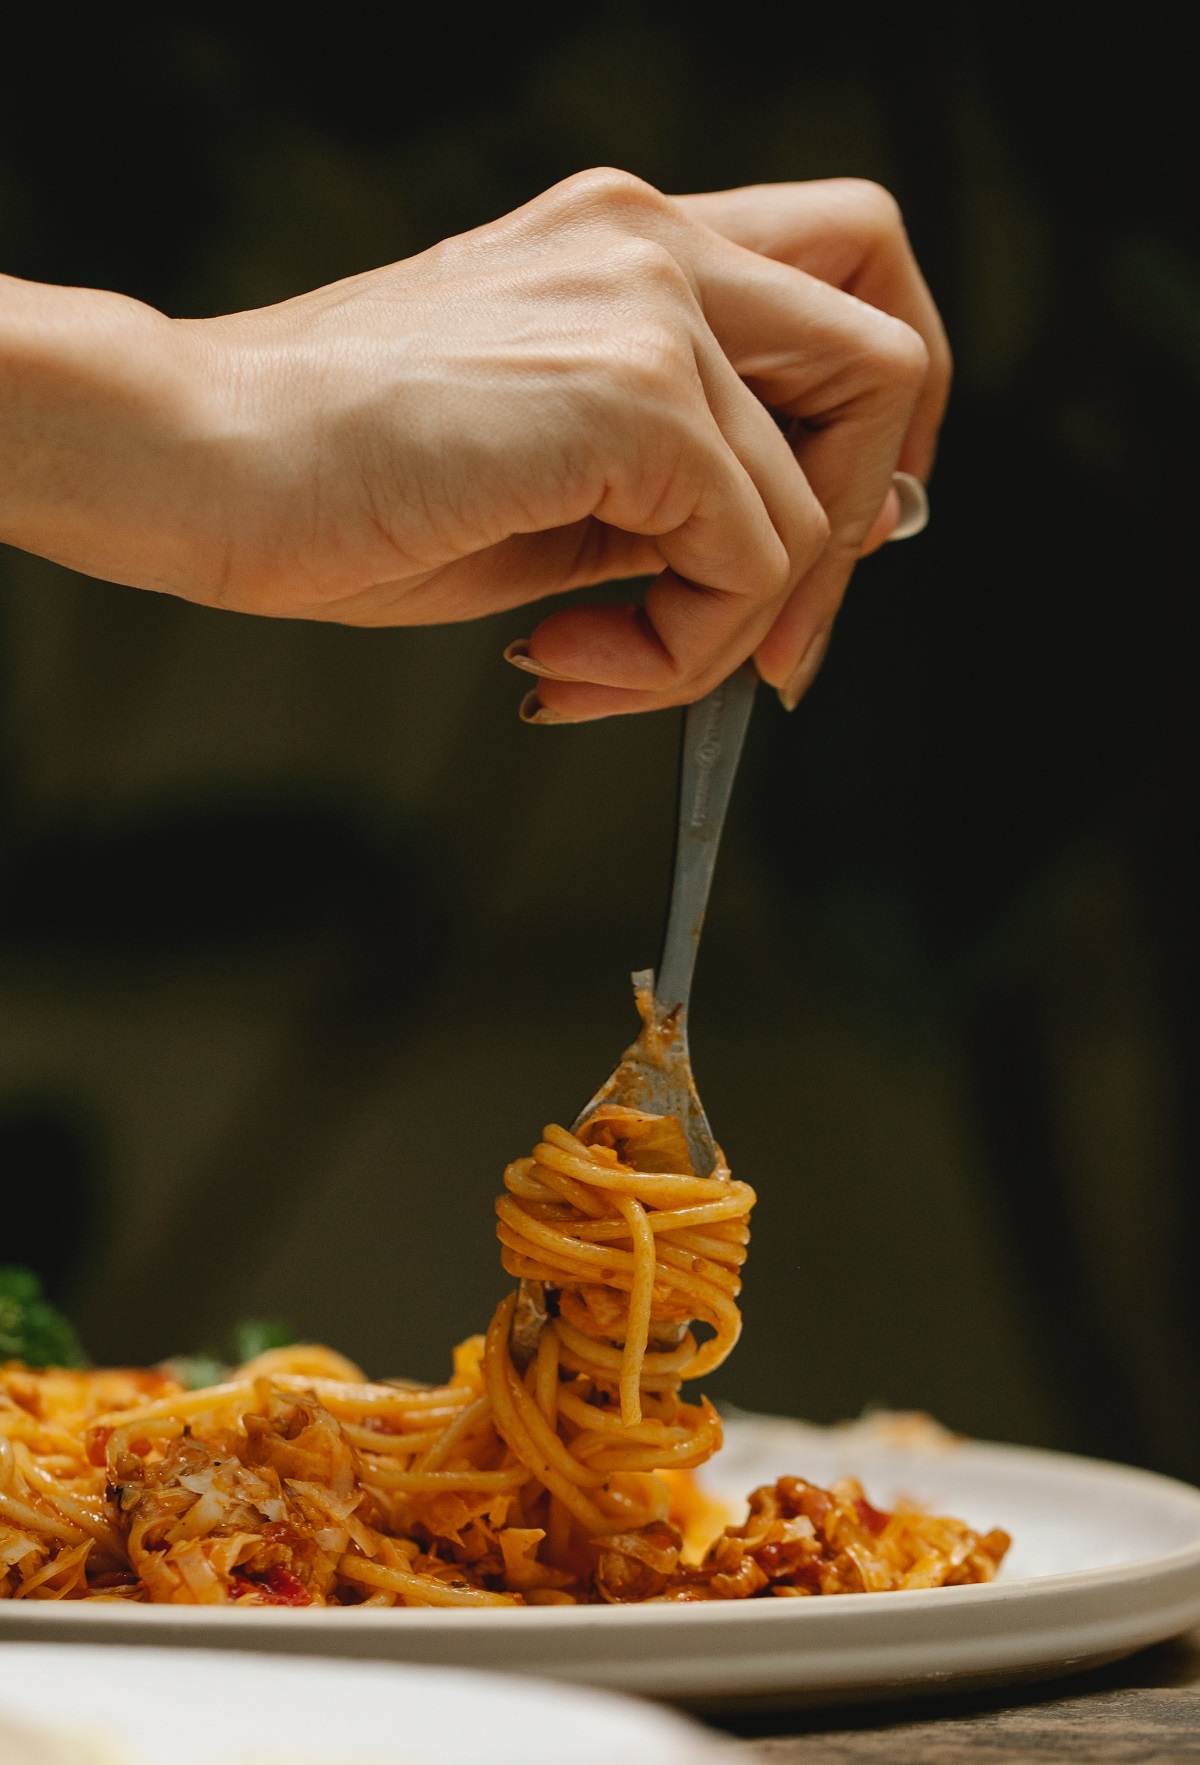 A woman twirls spaghetti noodles onto her fork